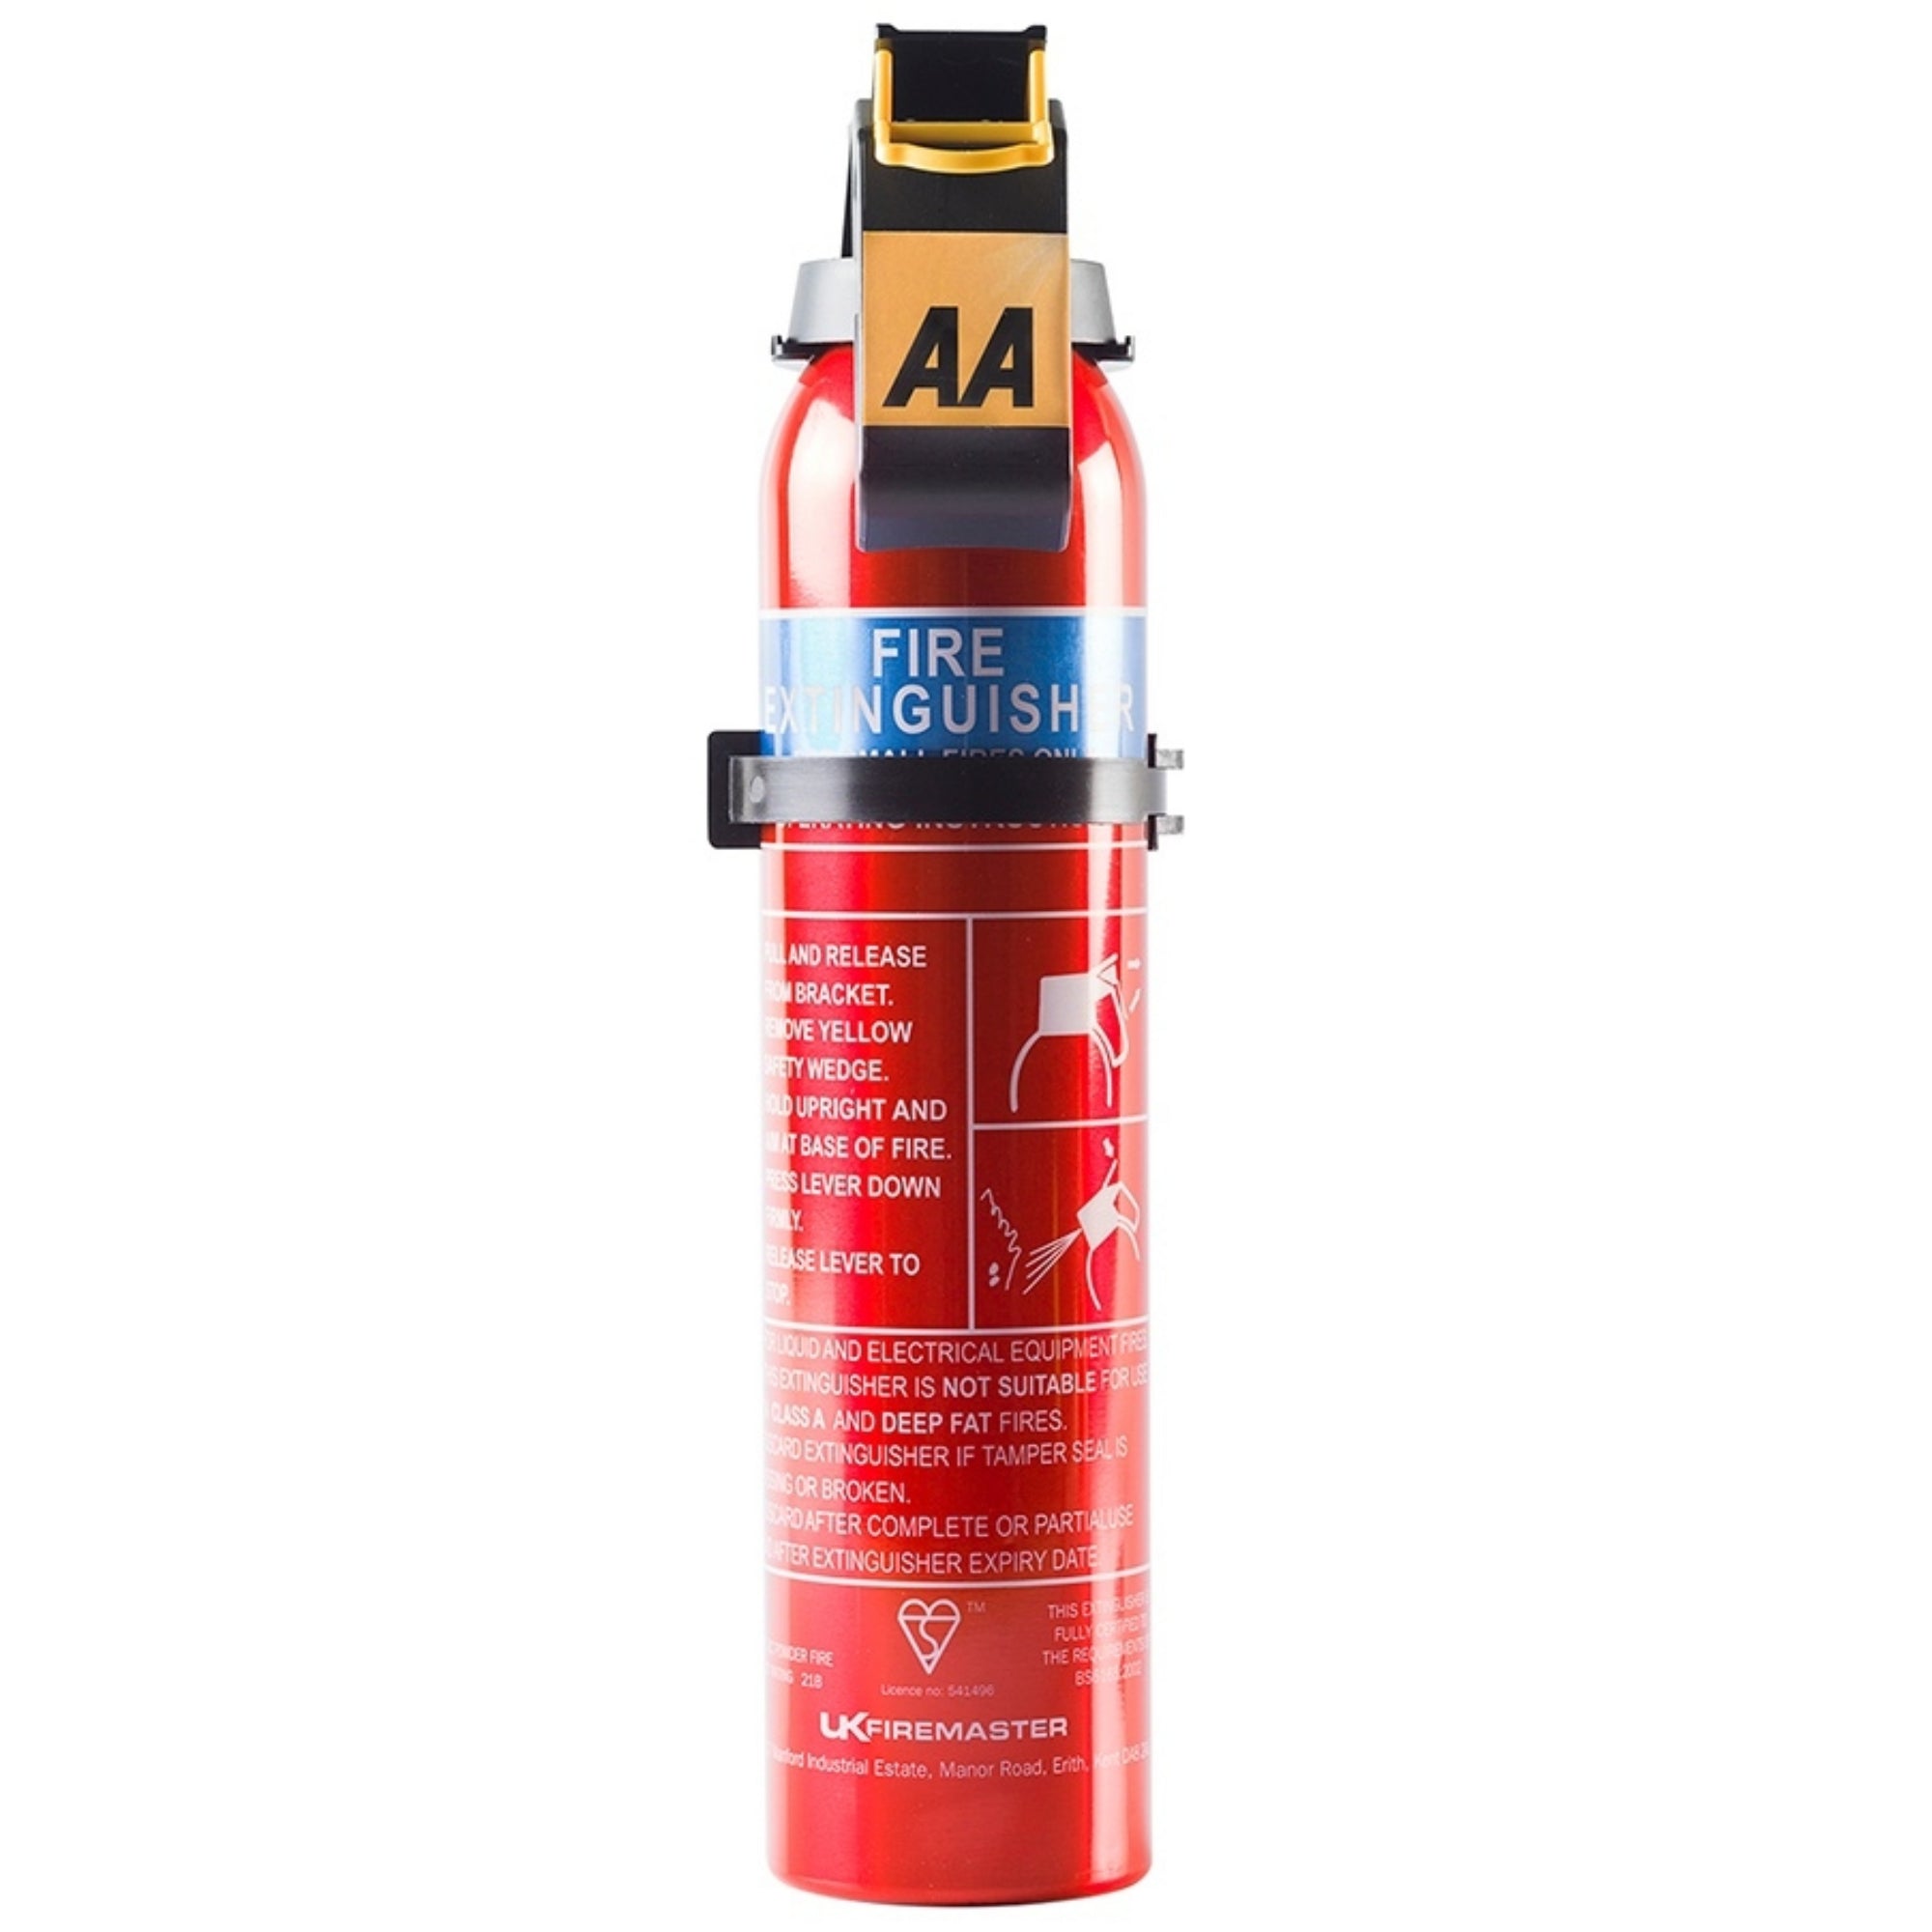 AA Fire Extinguisher 600G